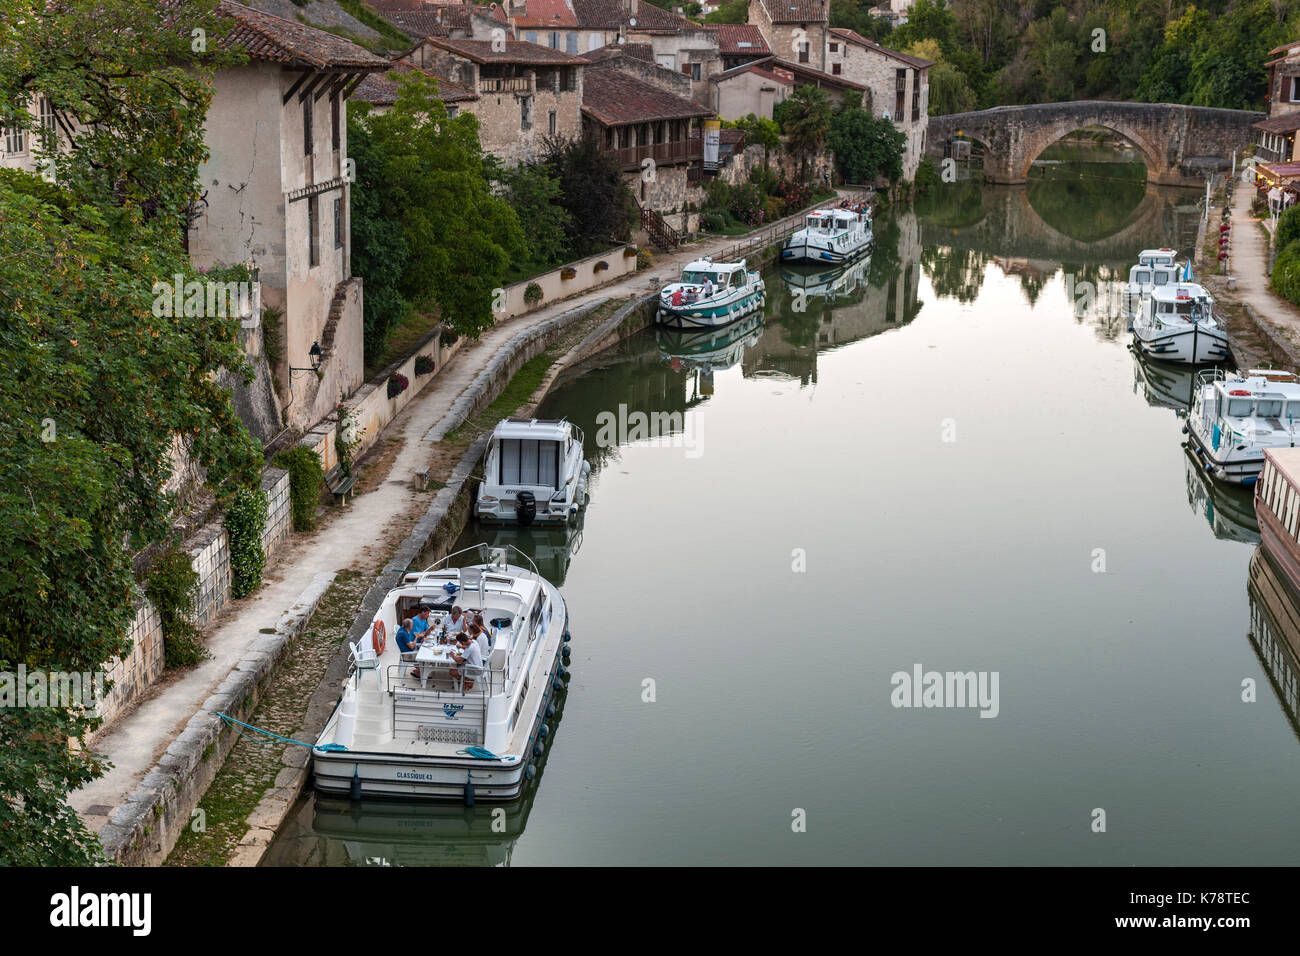 Canal boats on the Petite Baïse River in the town of Nérac in the Dordogne region of southwest France. Stock Photo